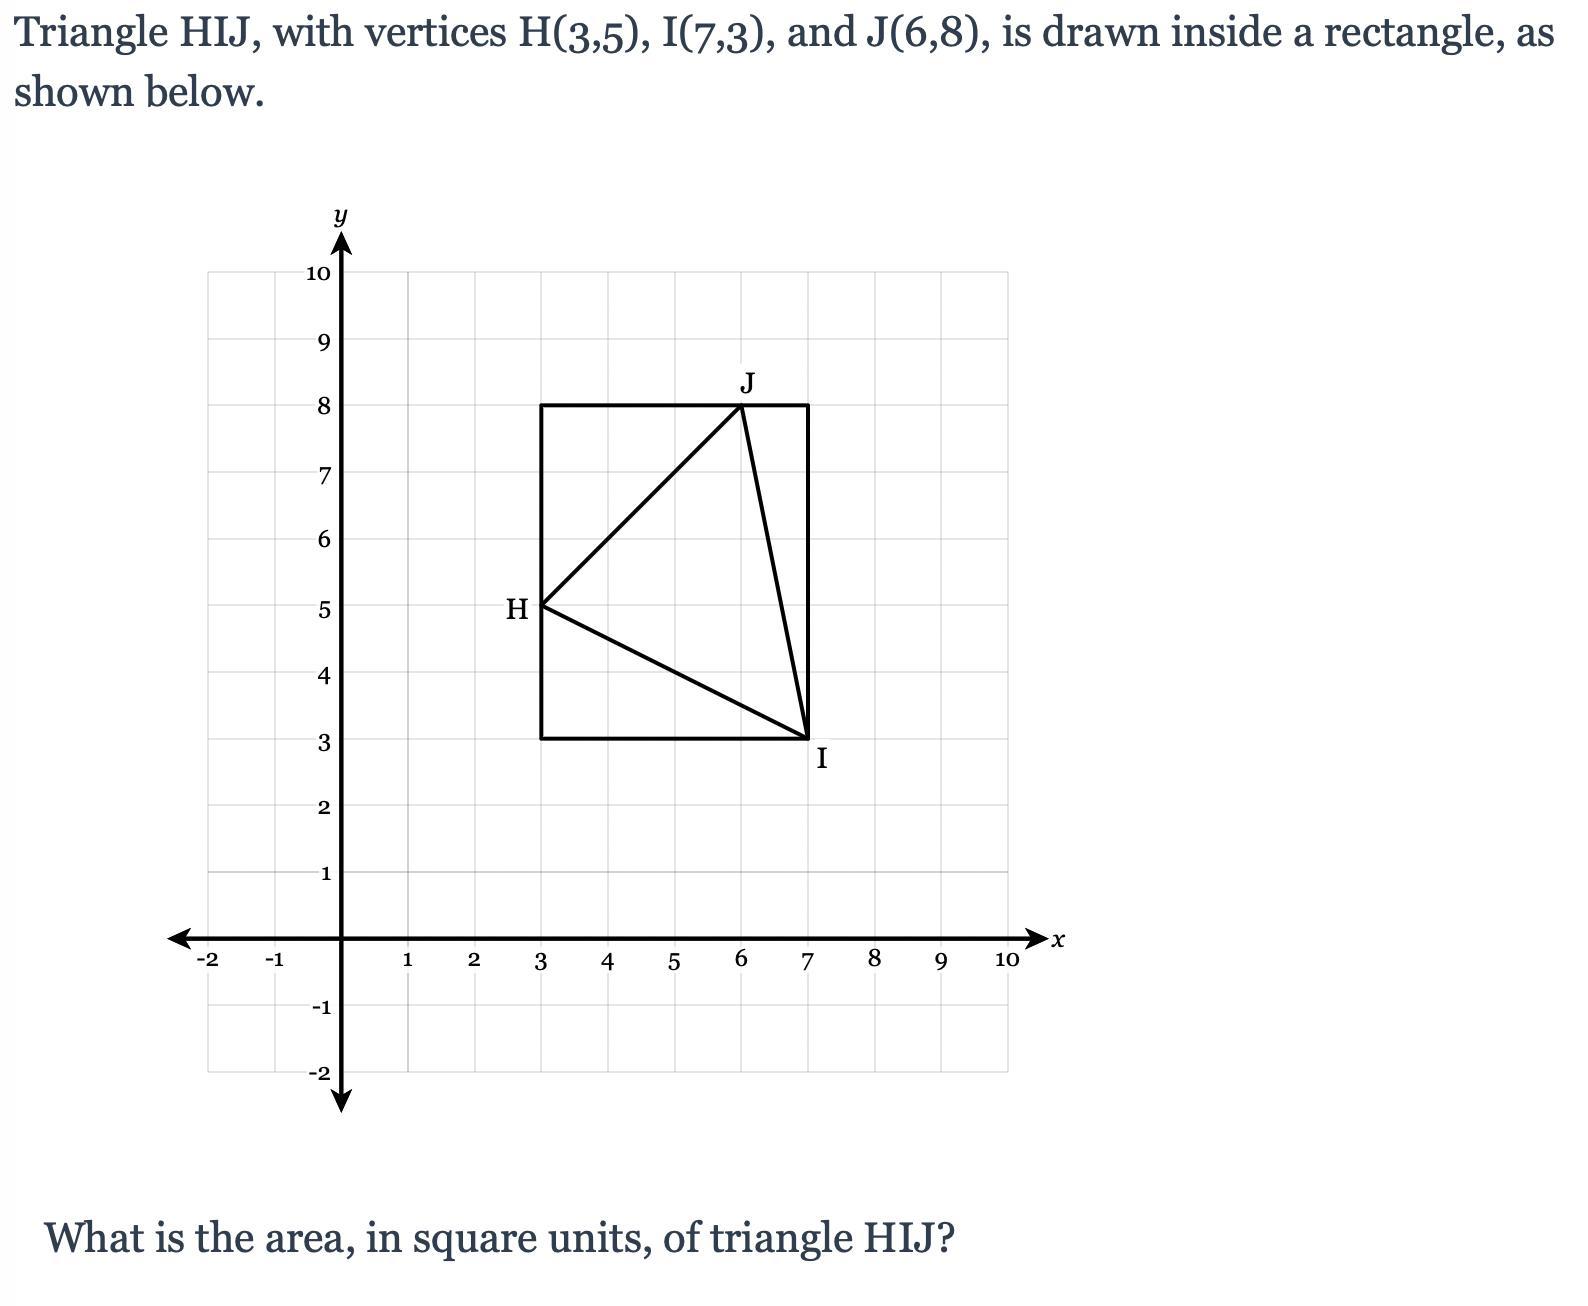 I Need Help With Finding The Area To This Triangle. This Is Geometry By The Way.